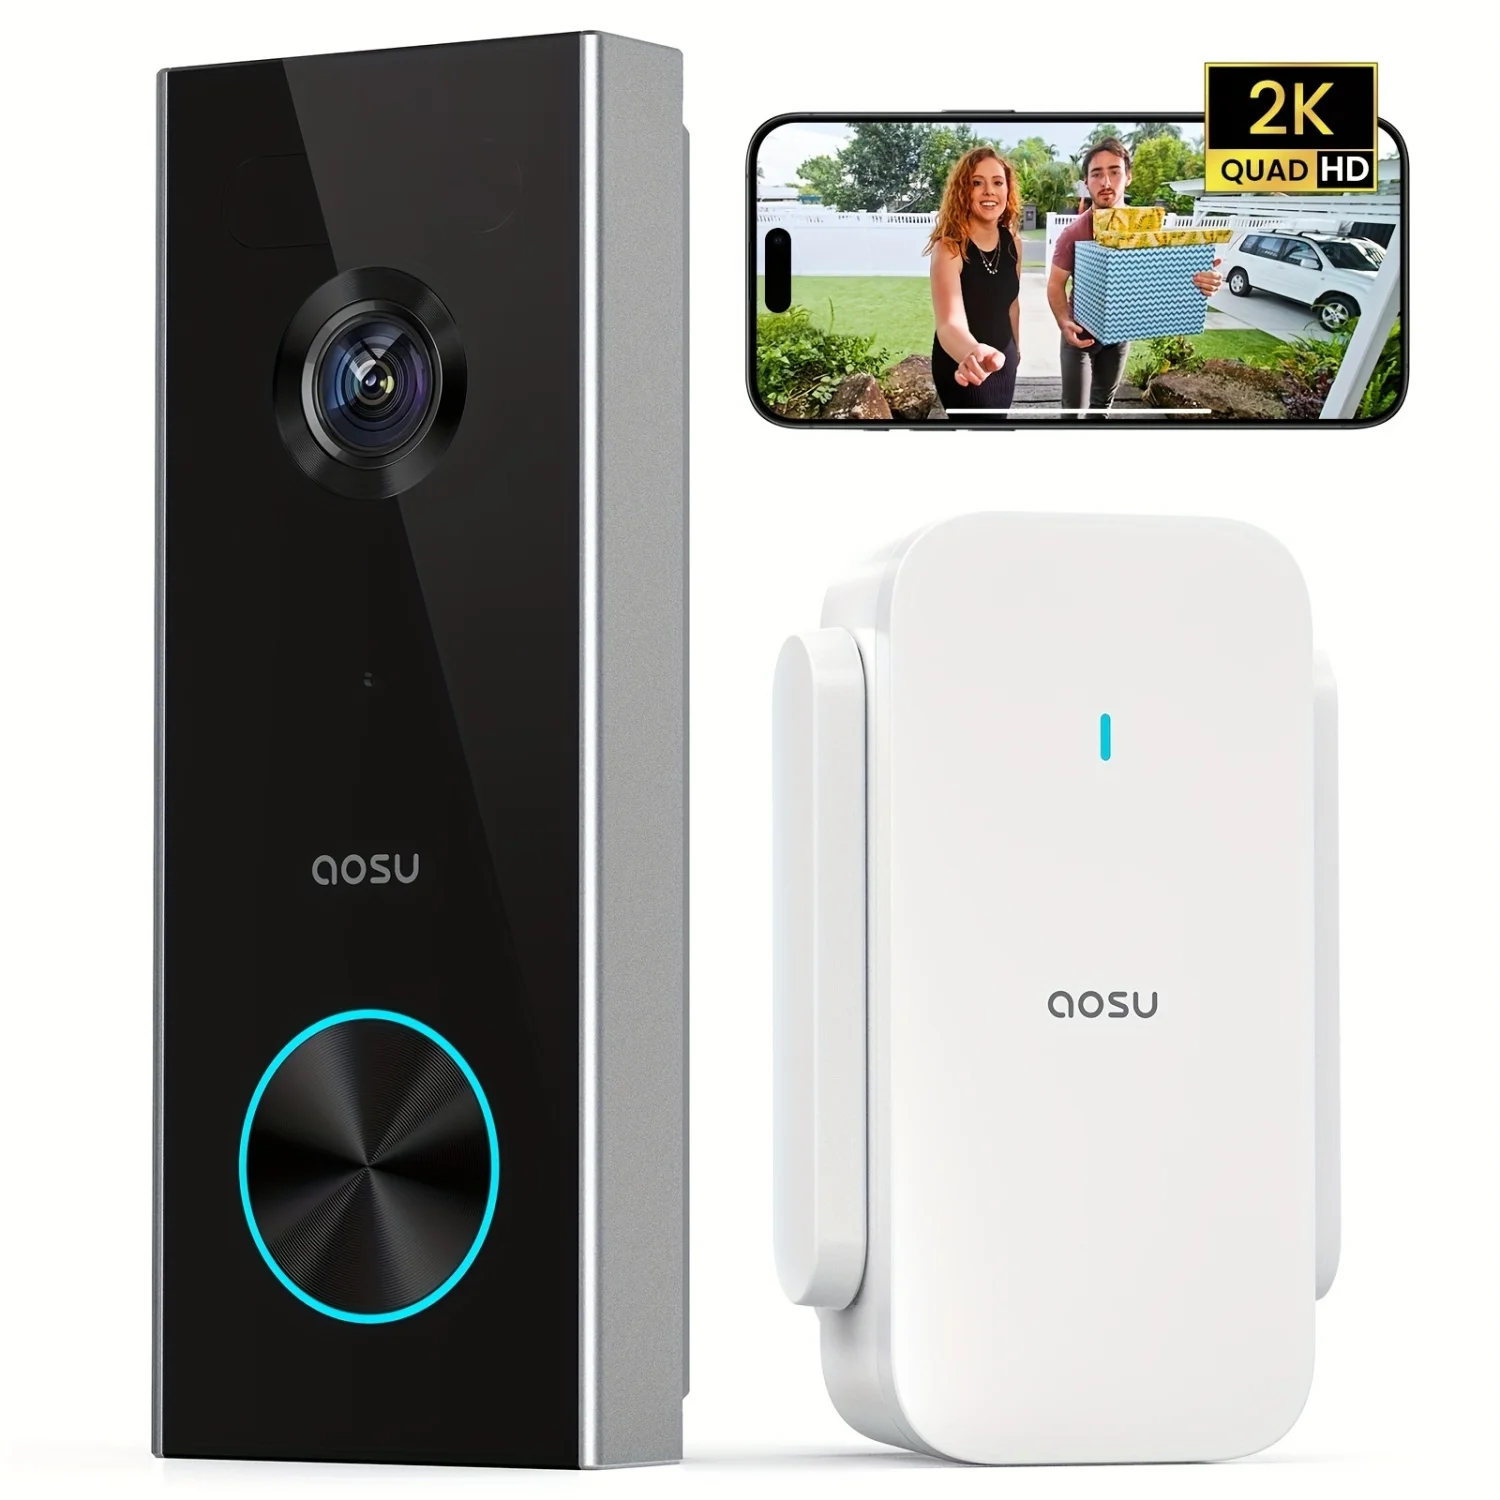 

Doorbell Camera Wireless, Battery-Powered Video Doorbell with Chime, 2K Resolution, No Monthly Fees, 166° Ultra Wide Angle, 180